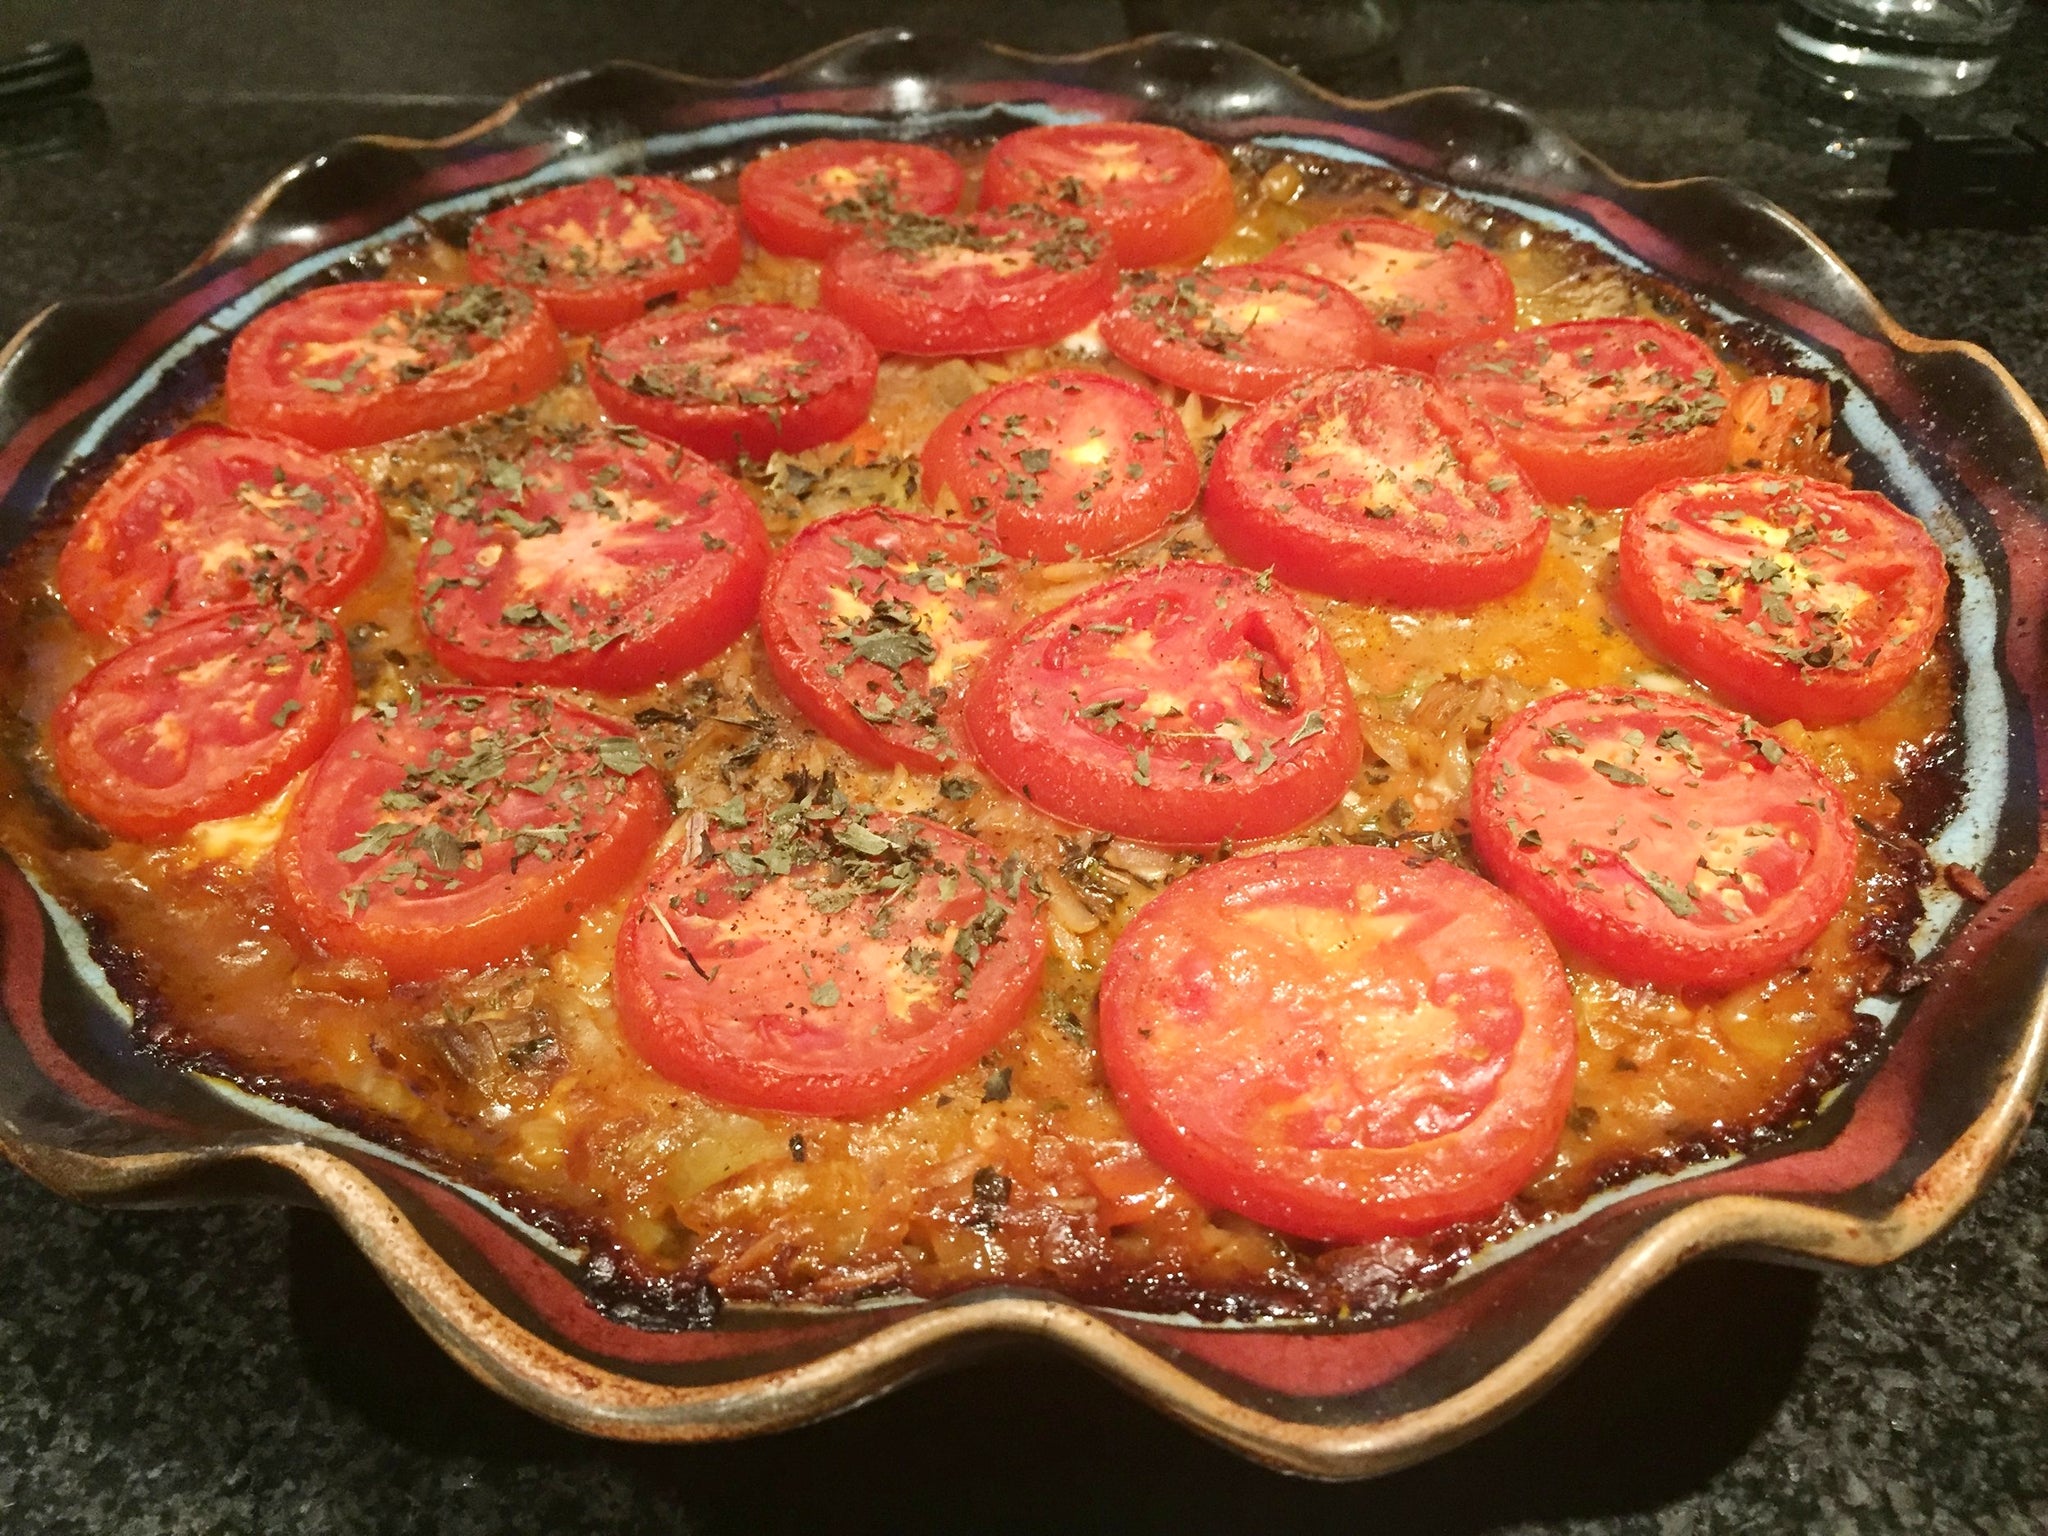 Baked Orzo with Eggplant, Celery, Carrots and Cheese